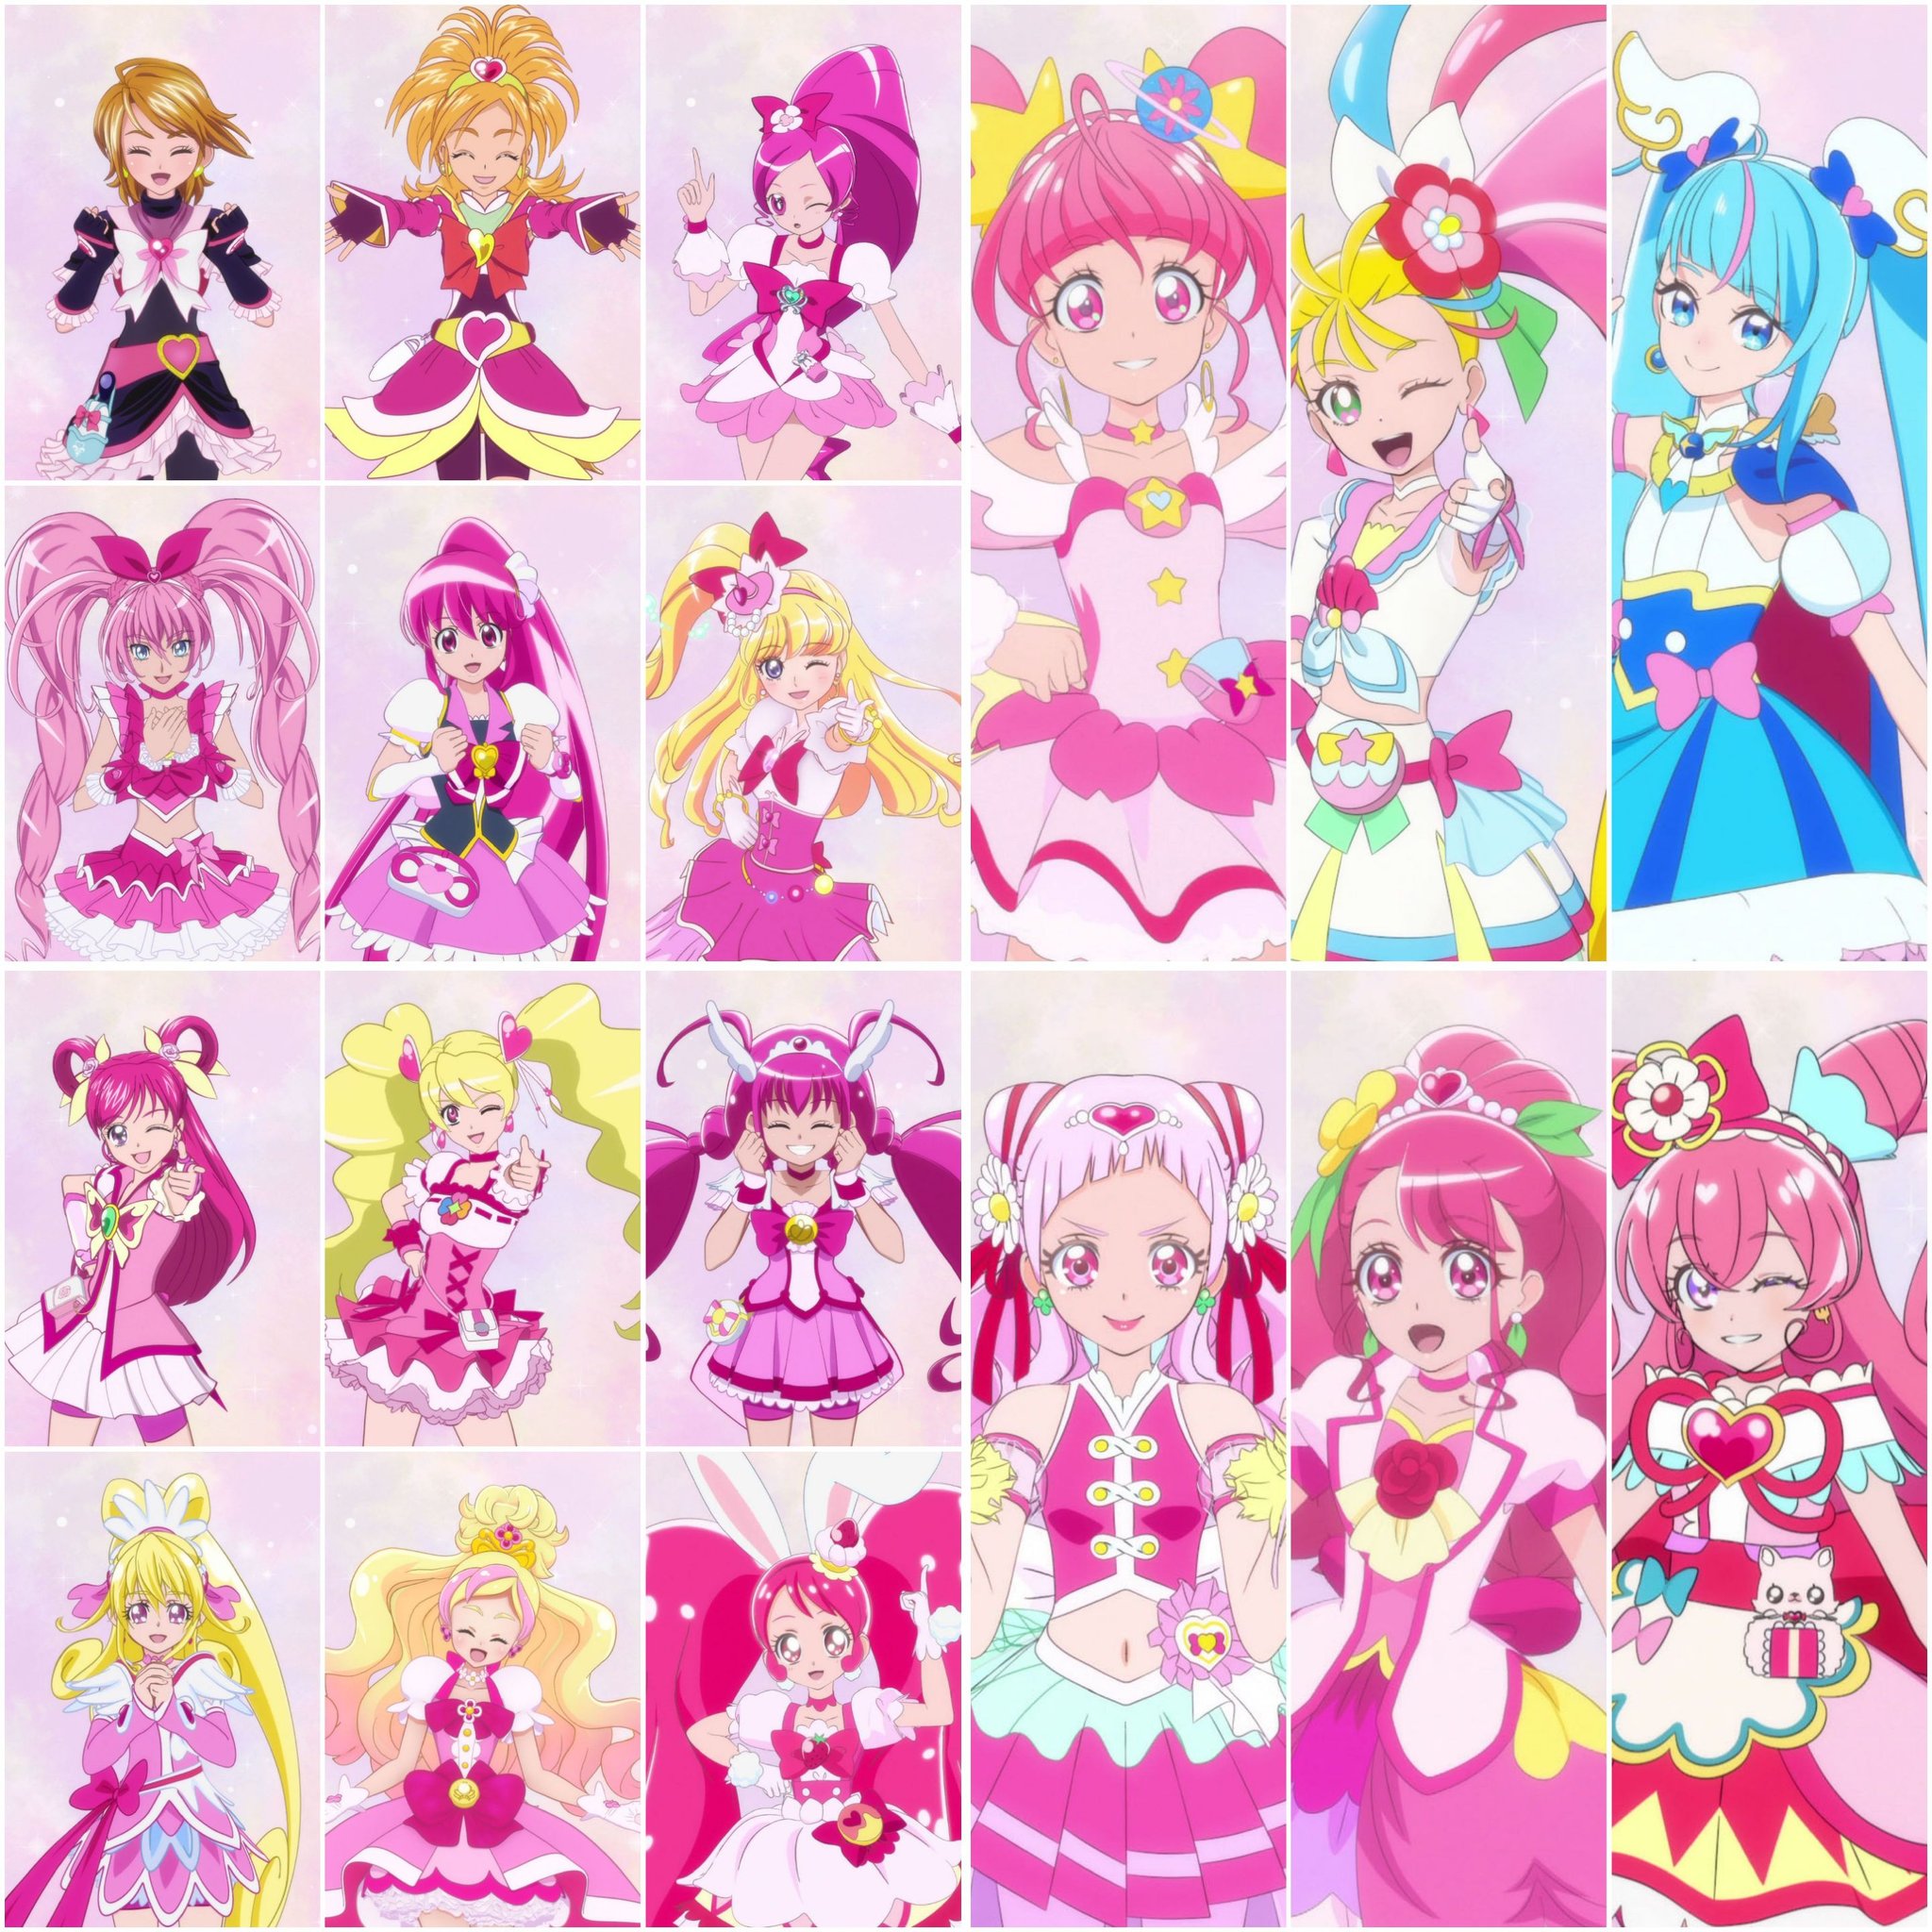 KuroYami on X: Green/Teal Precures from another world! Who's your